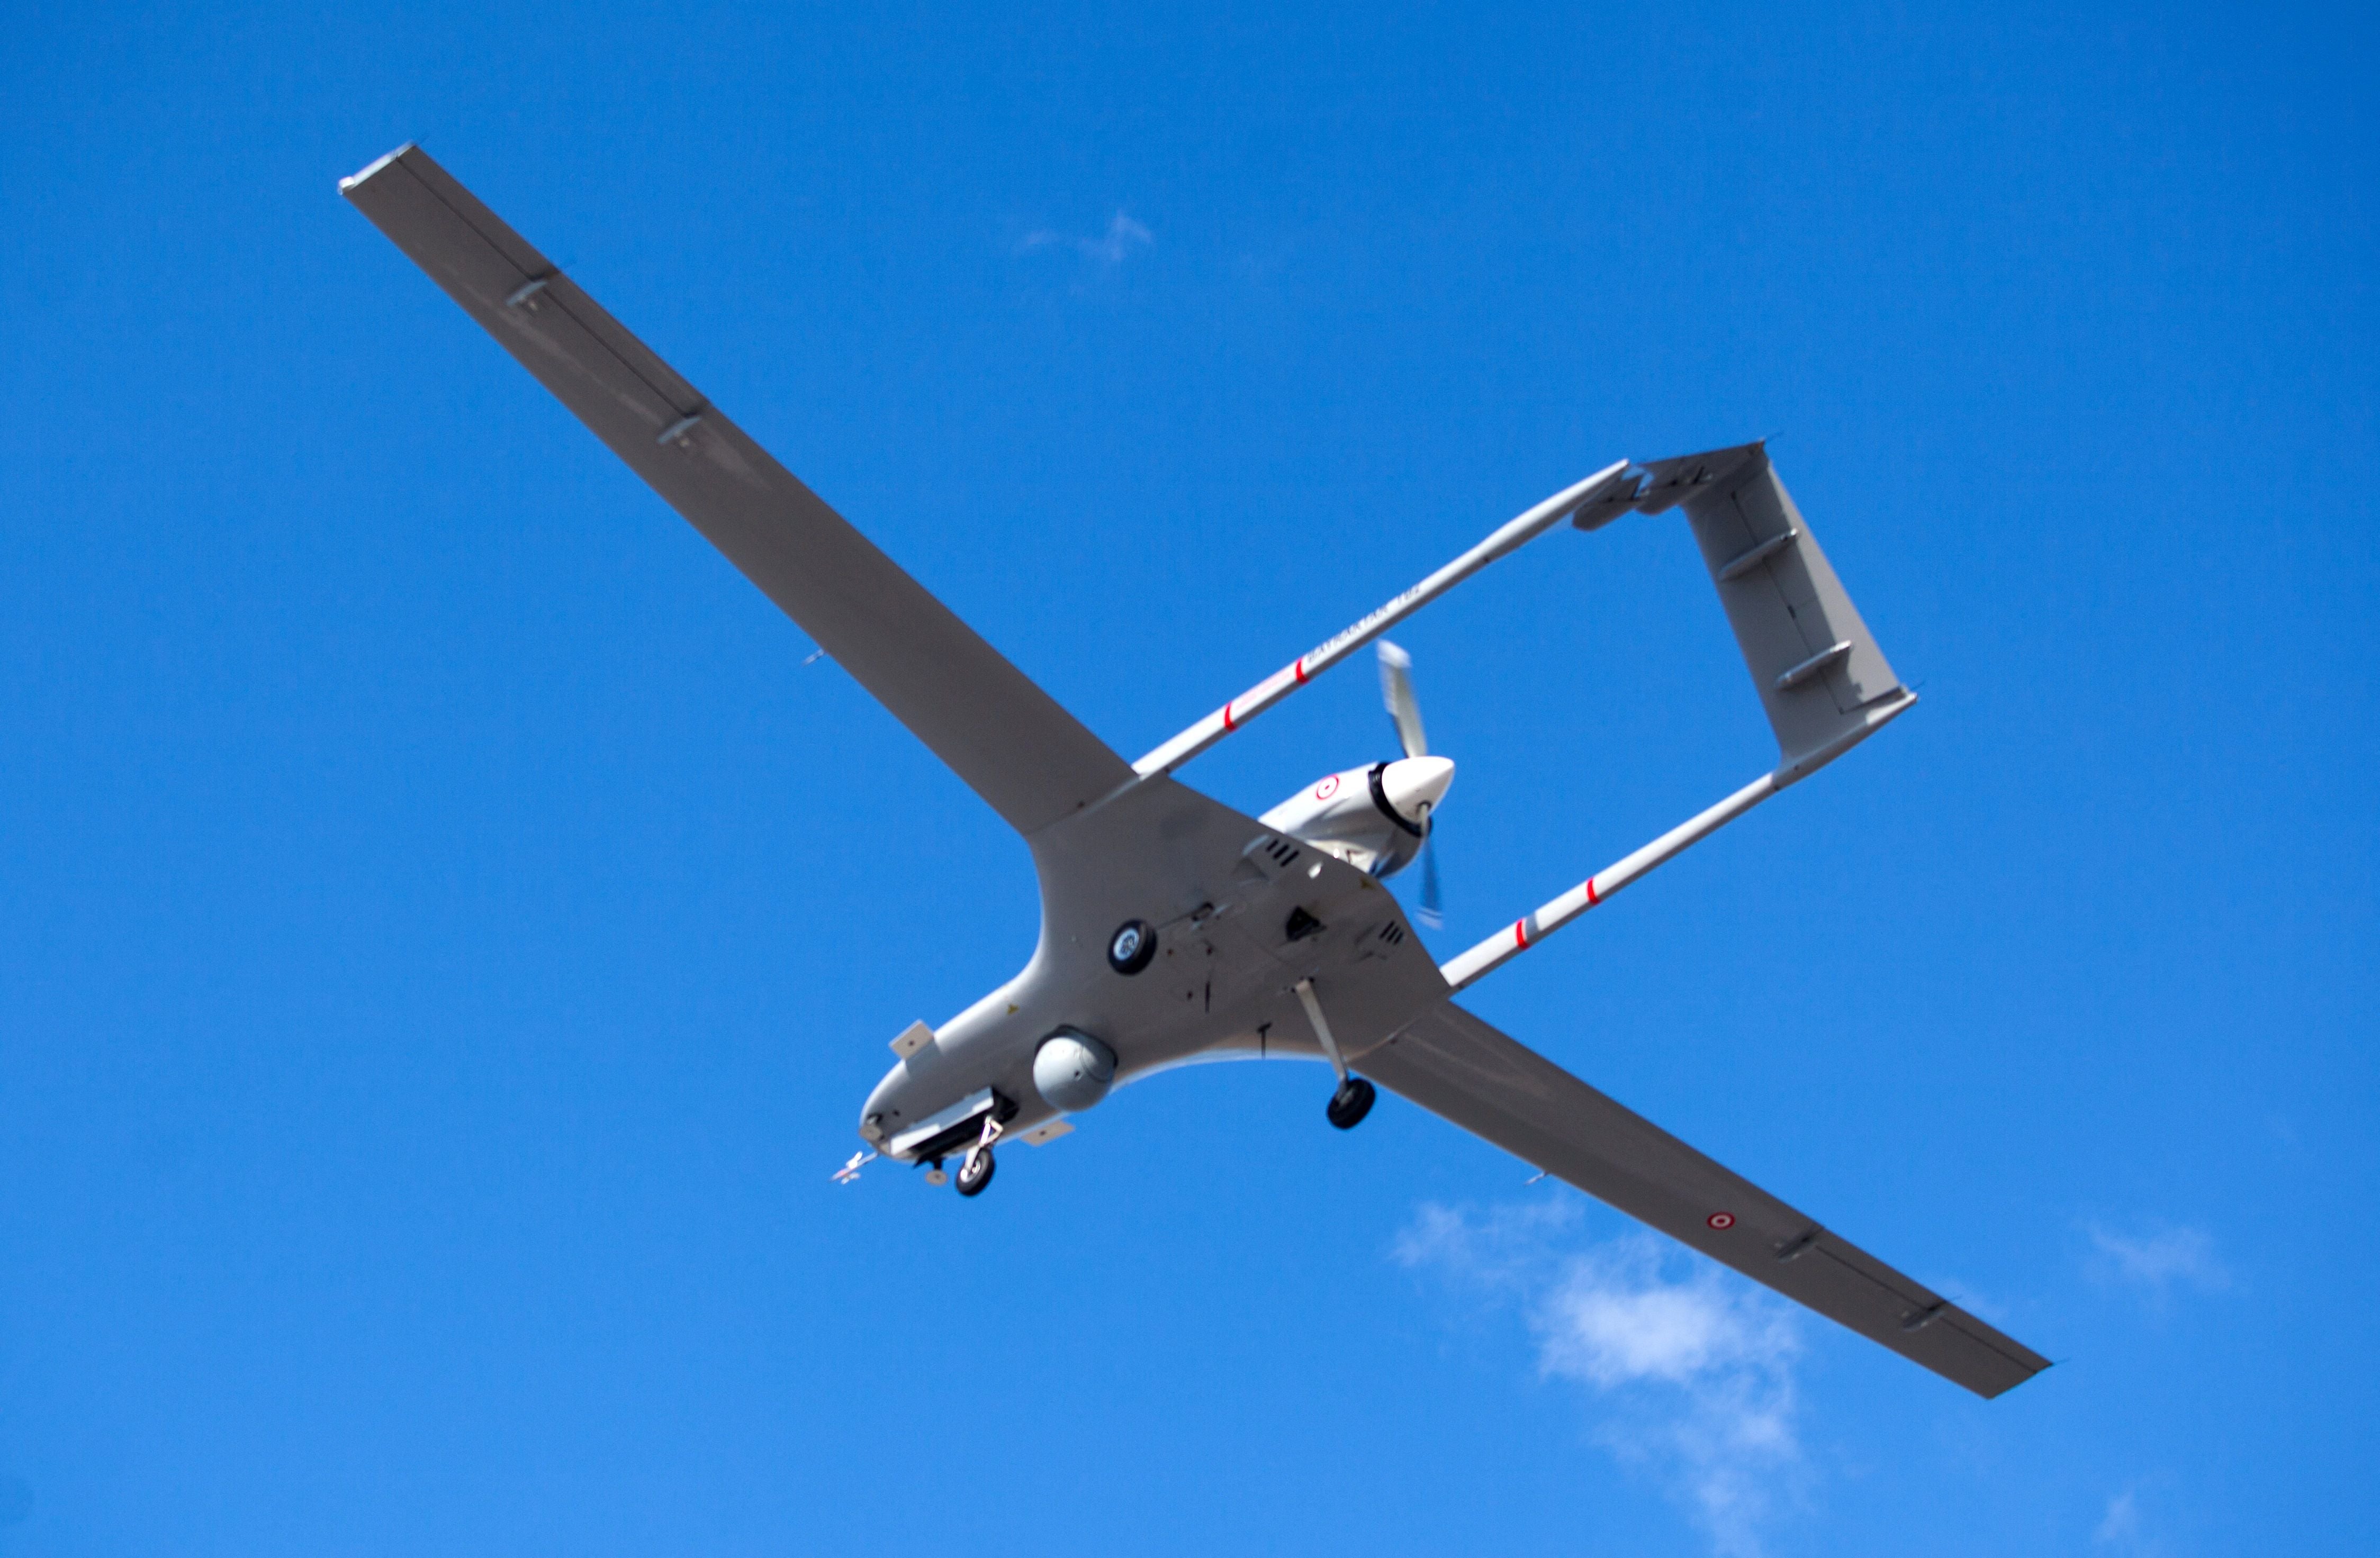 The Turkish-made Bayraktar TB2 drone has been used in modern conflicts in Syria and Libya